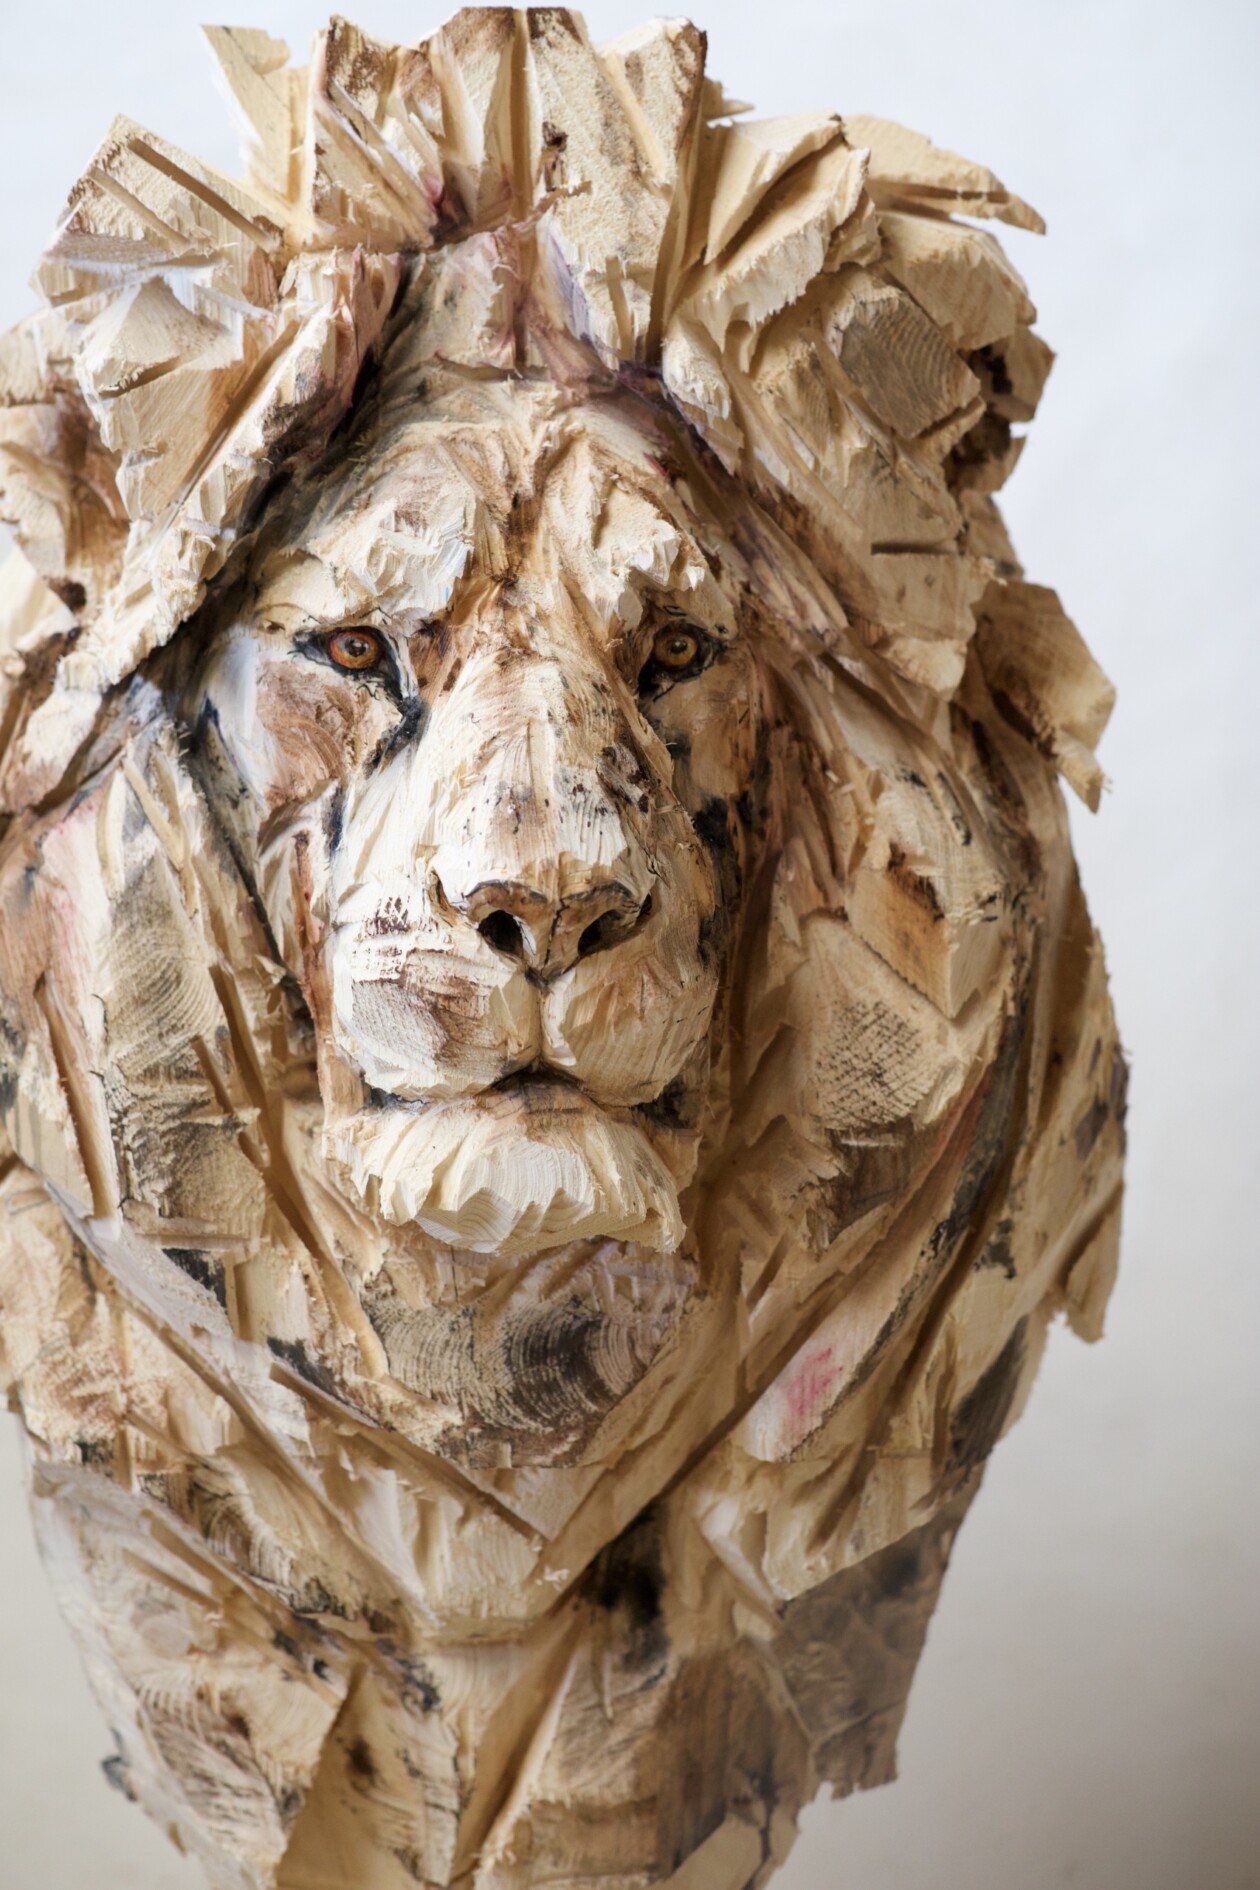 Jürgen Lingl Hand Carves Precise And Textured Figurative Sculptures From Wood (4)